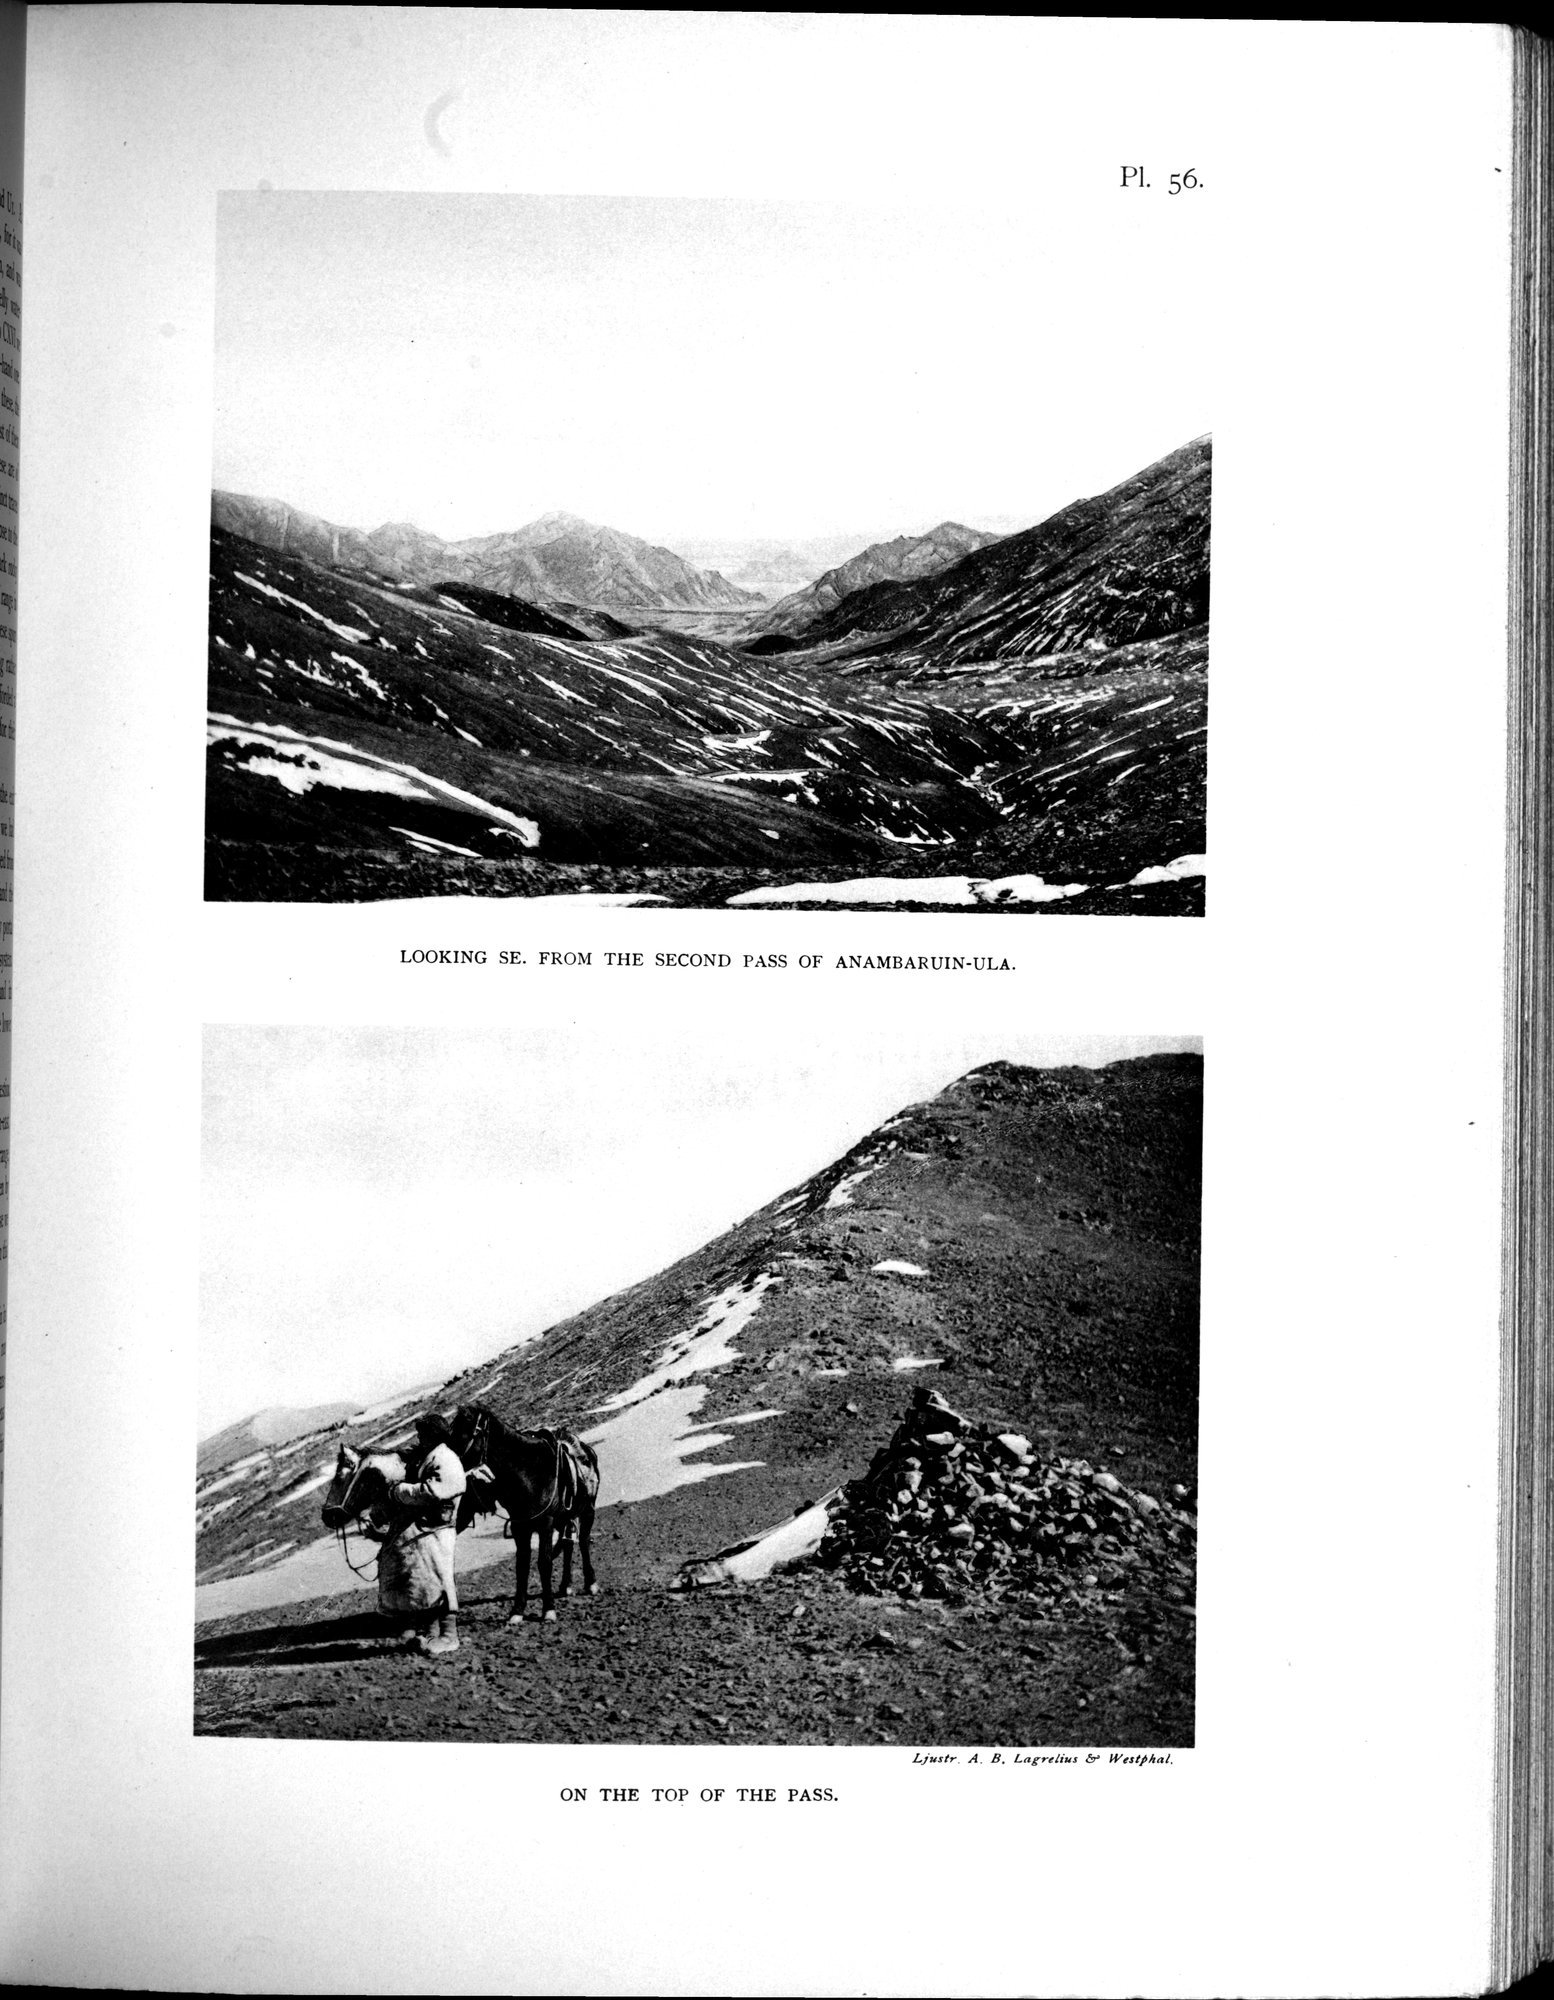 Scientific Results of a Journey in Central Asia, 1899-1902 : vol.3 / 493 ページ（白黒高解像度画像）